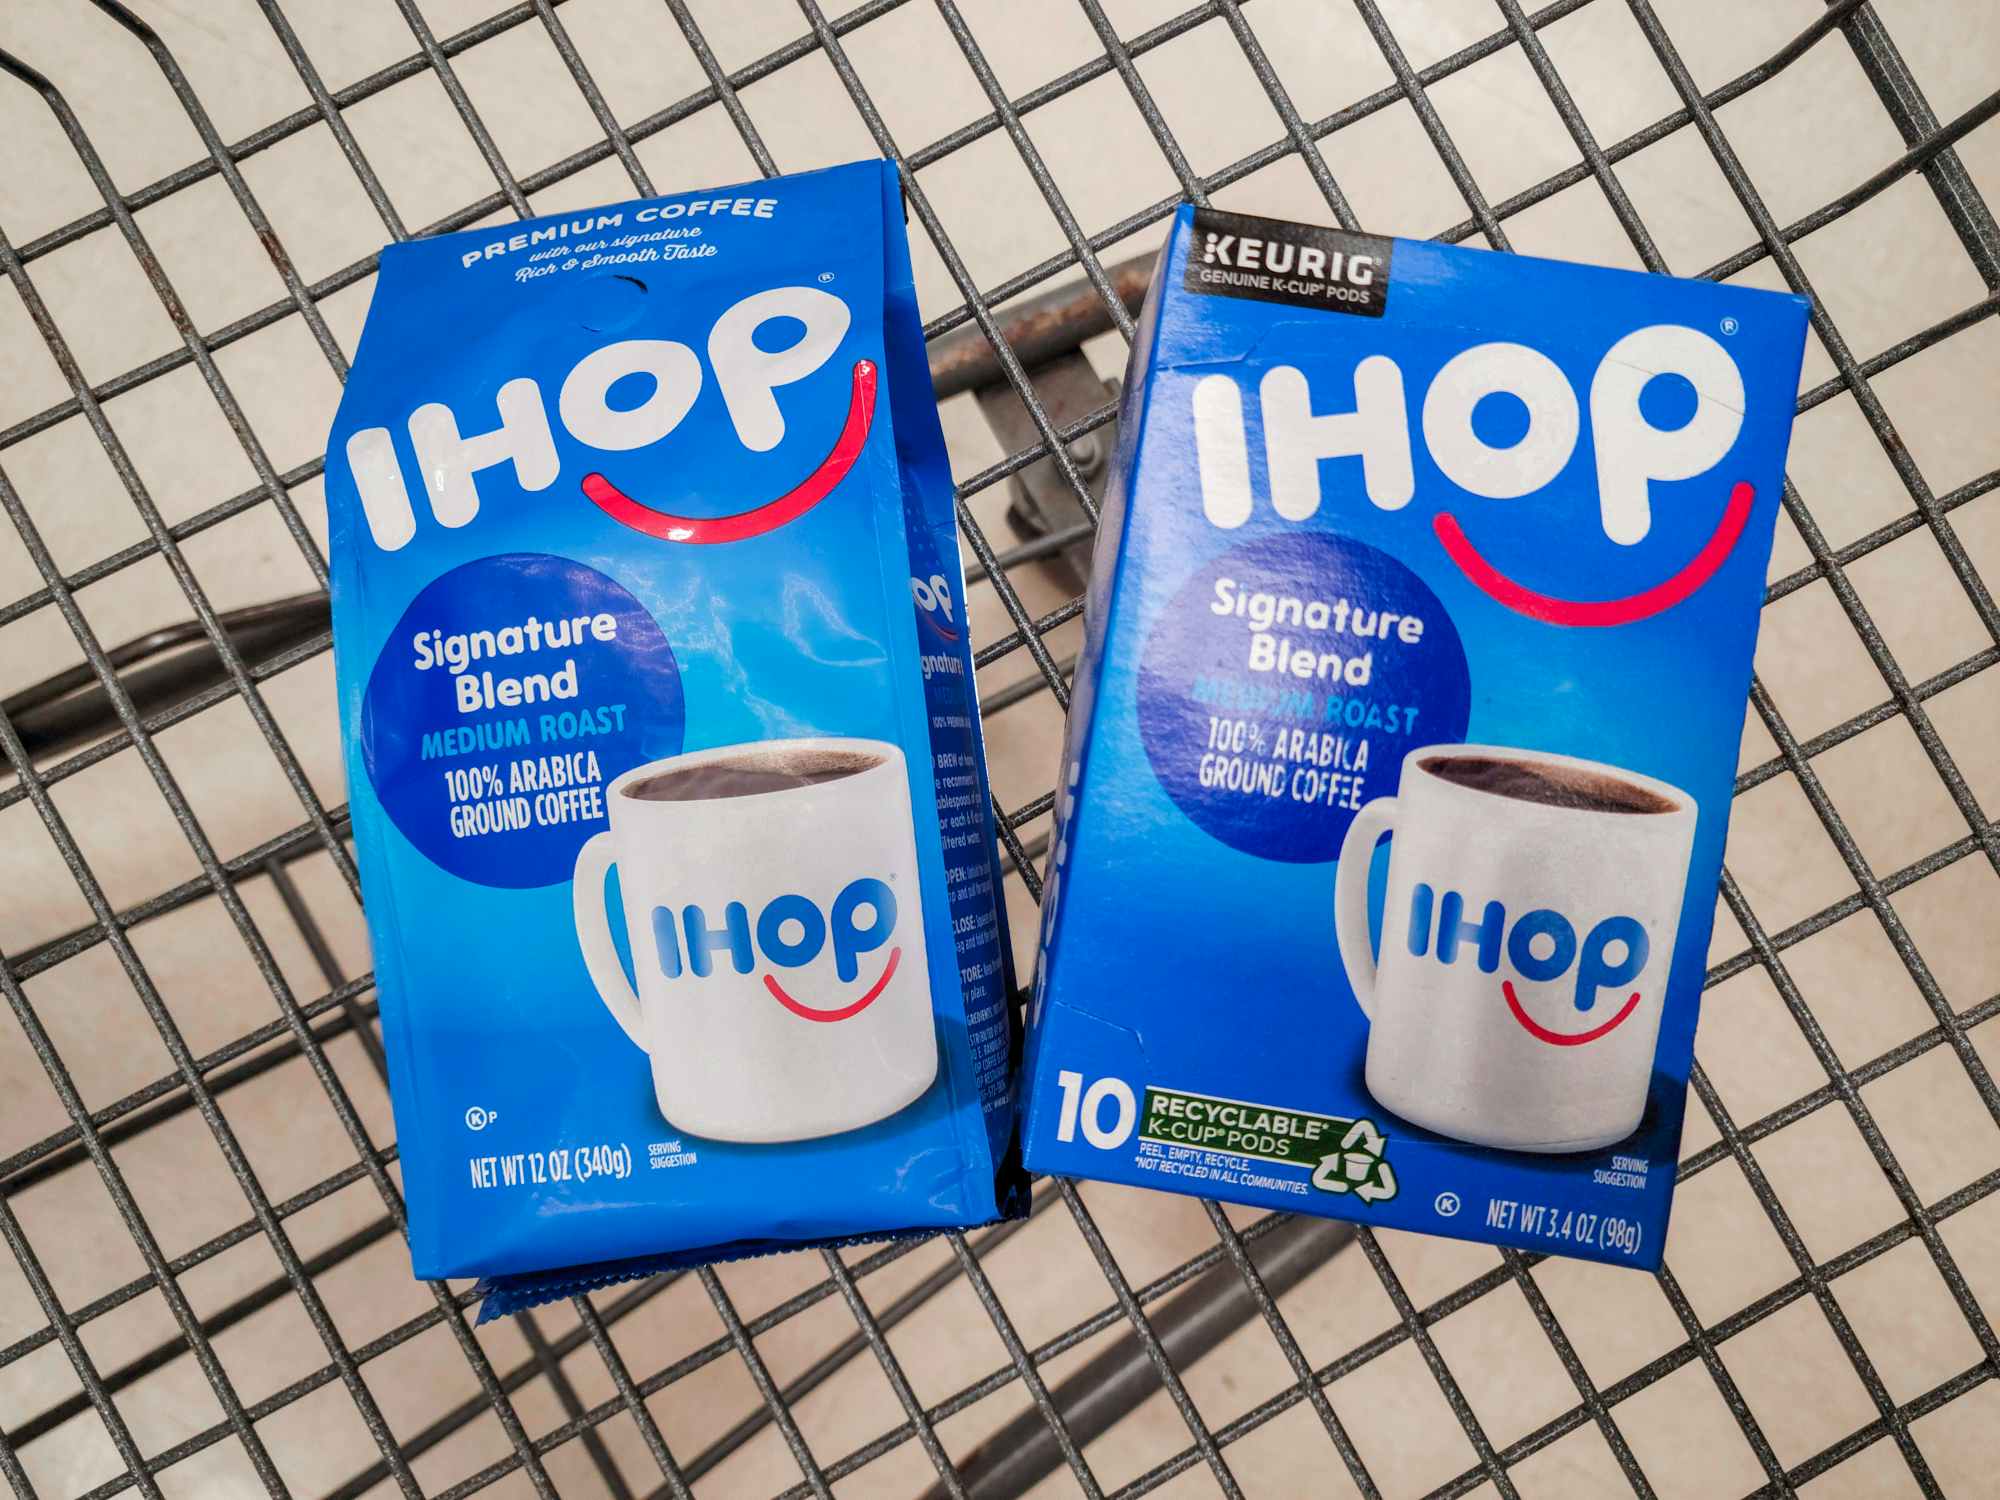 IHOP coffee and K-cups in a shopping cart